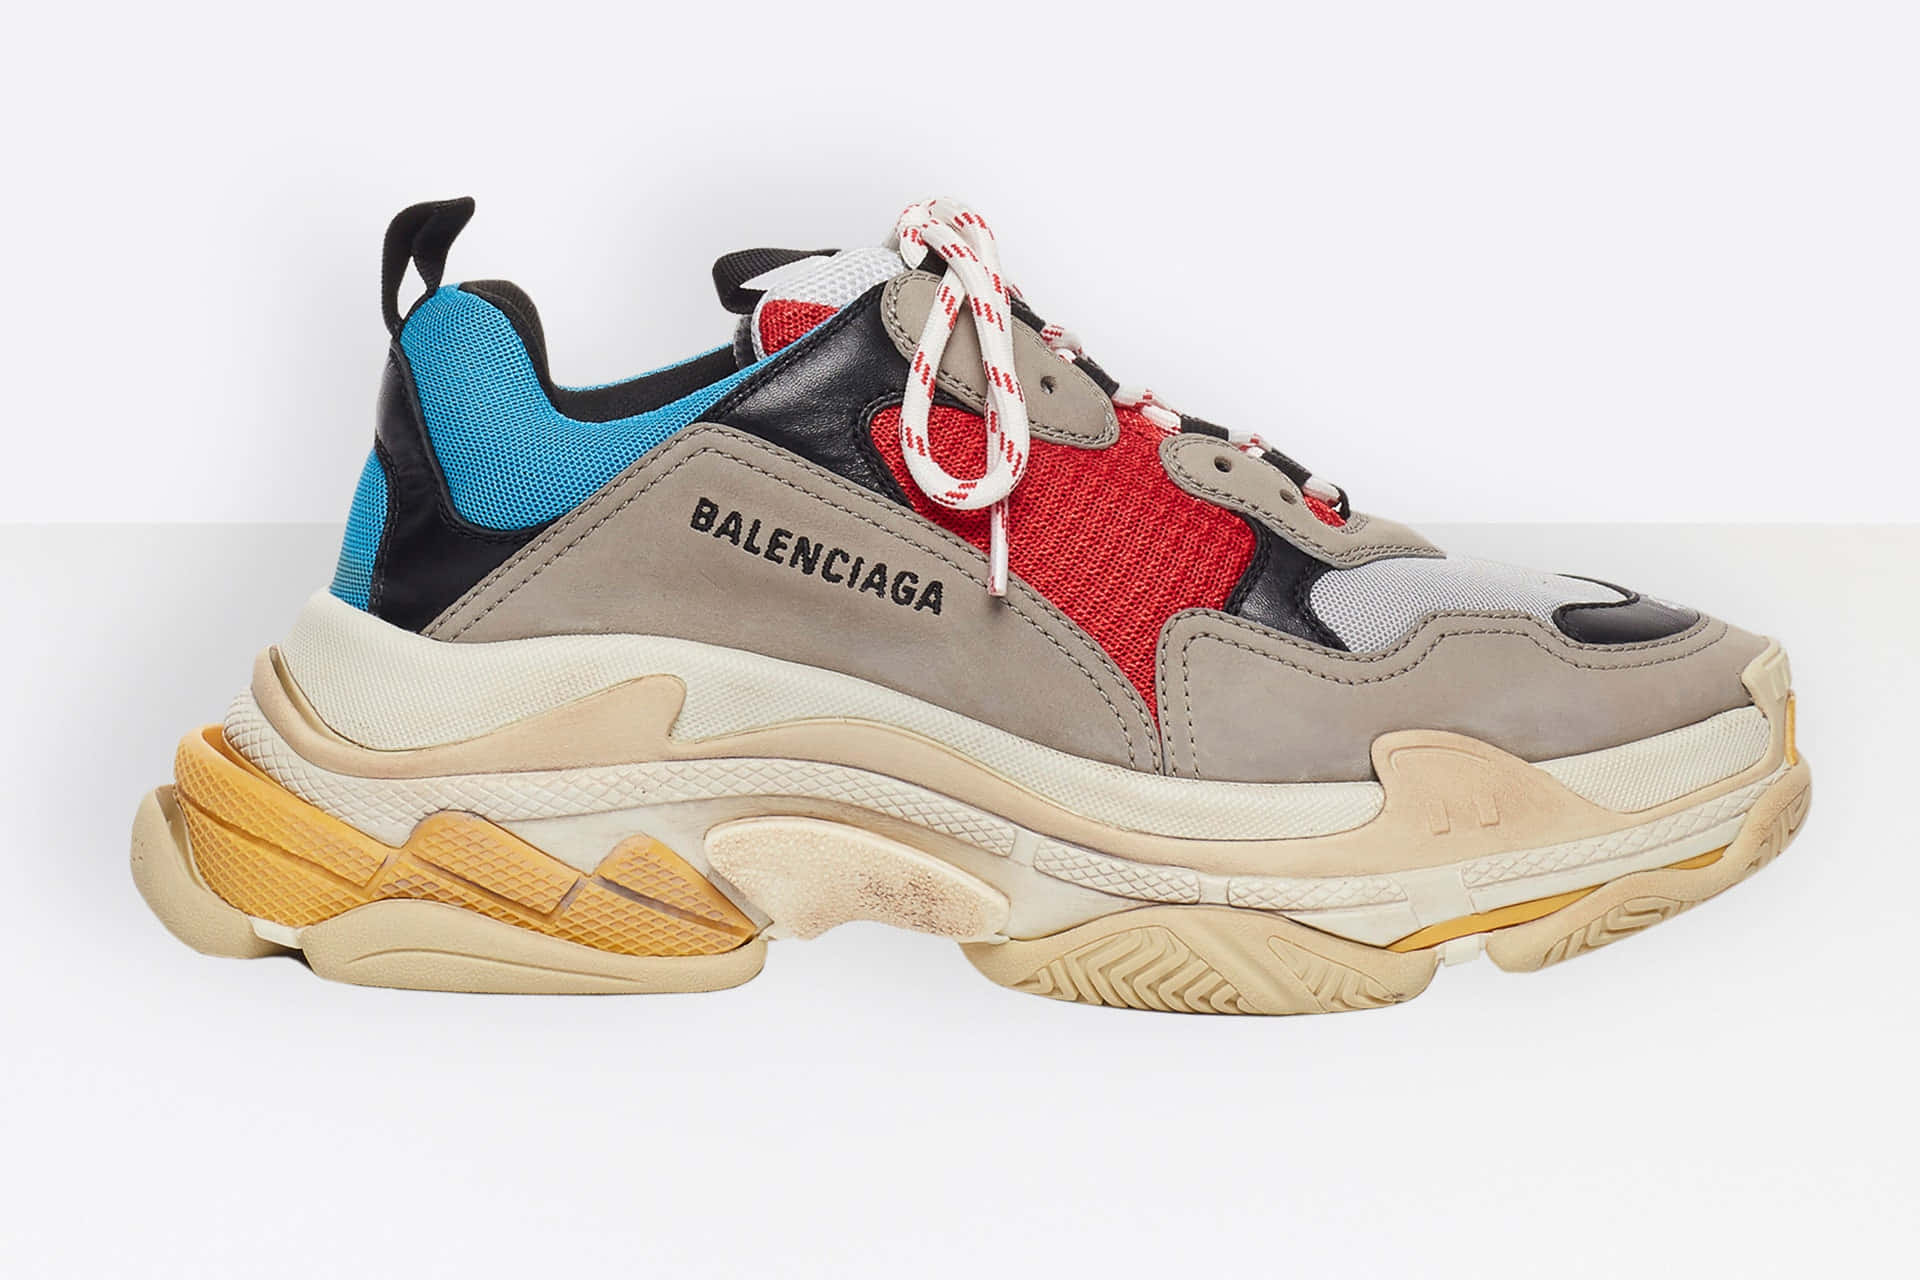 Step out in Style - Balenciaga